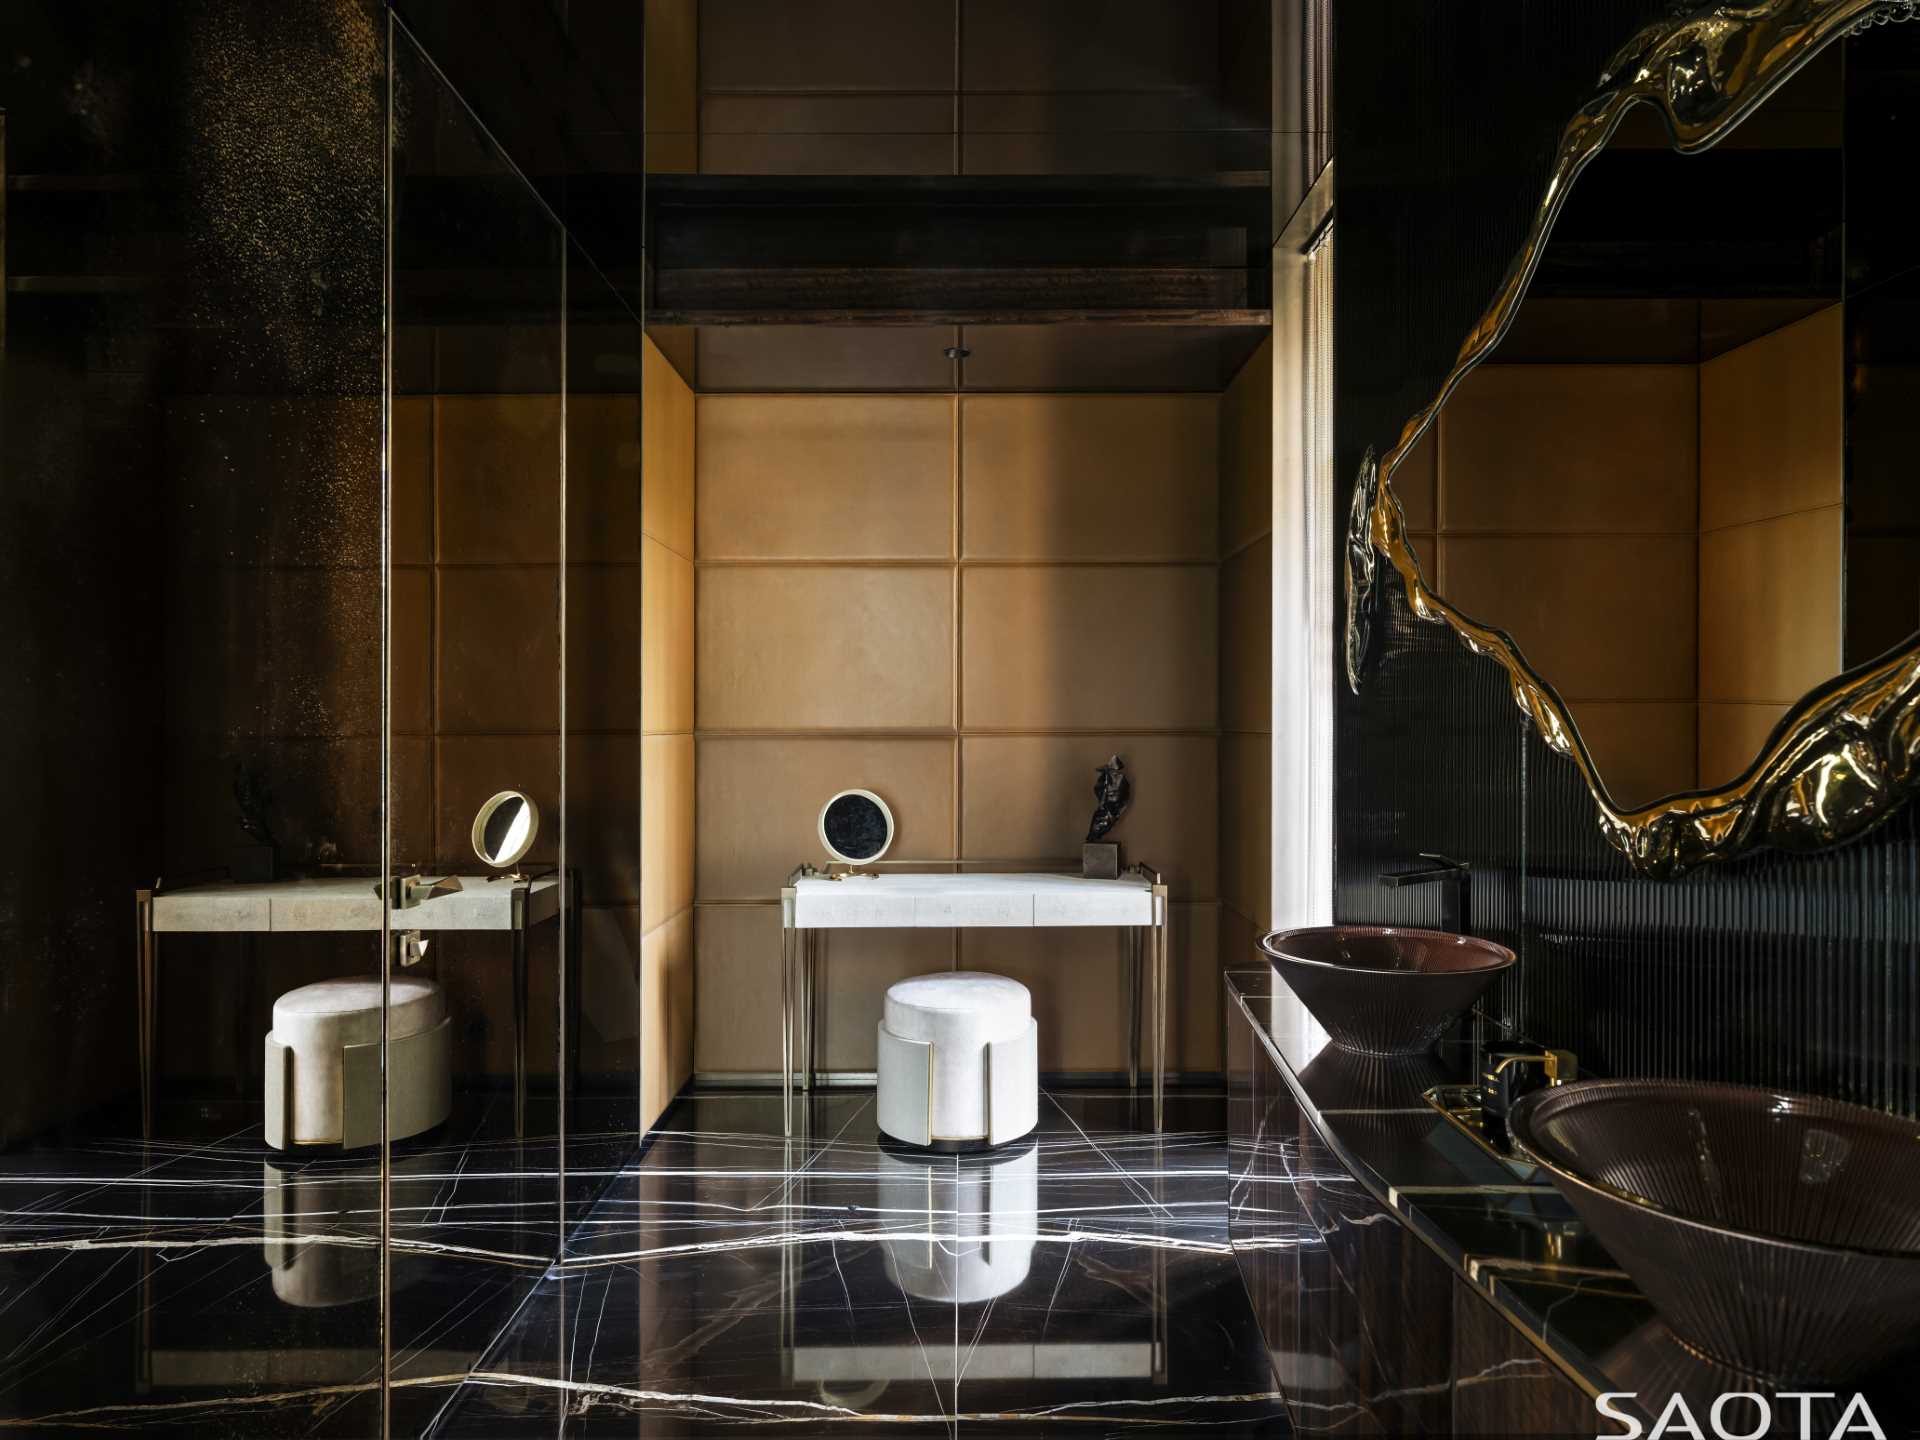 The bathroom with its dark walls and floor, has metallic accents for a luxurious touch.